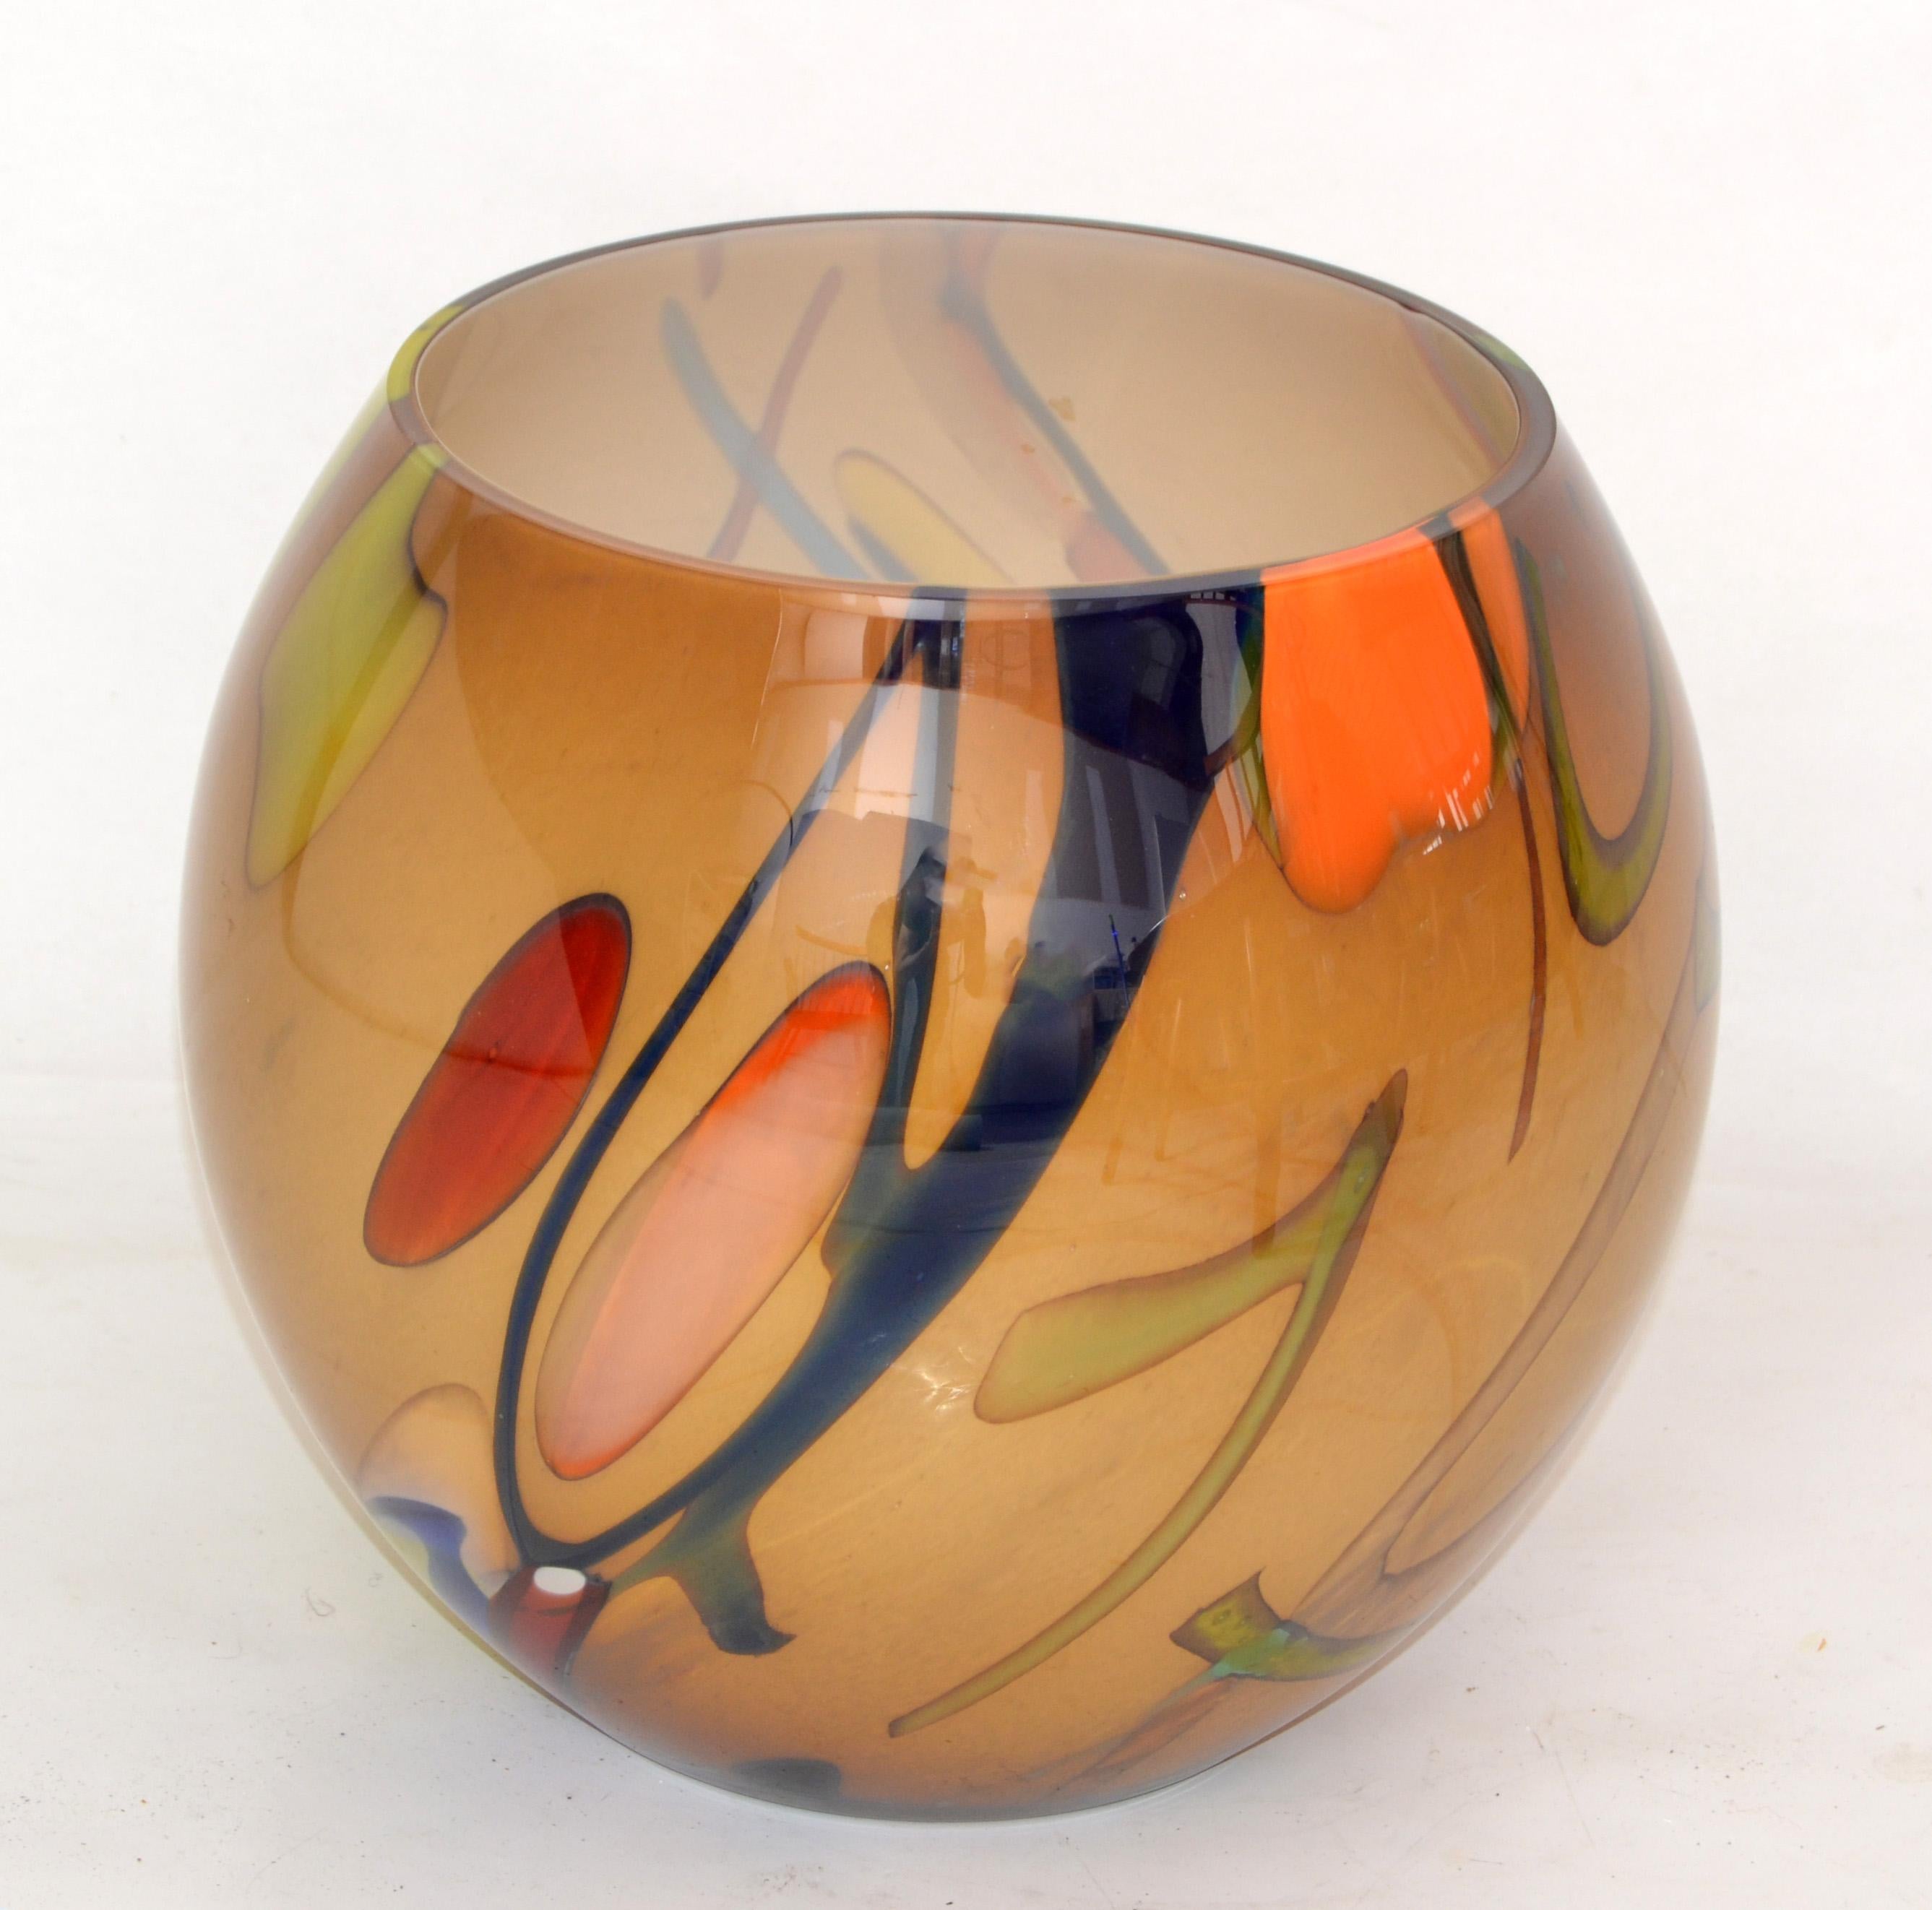 Heavy beautiful white encased round art glass Vase or Bowl in hues of brown, orange and green. 
Comes from the Eastern European Polish Nation, marked at the base, handmade in Poland.
Beautifully crafted and flowing color brilliance.